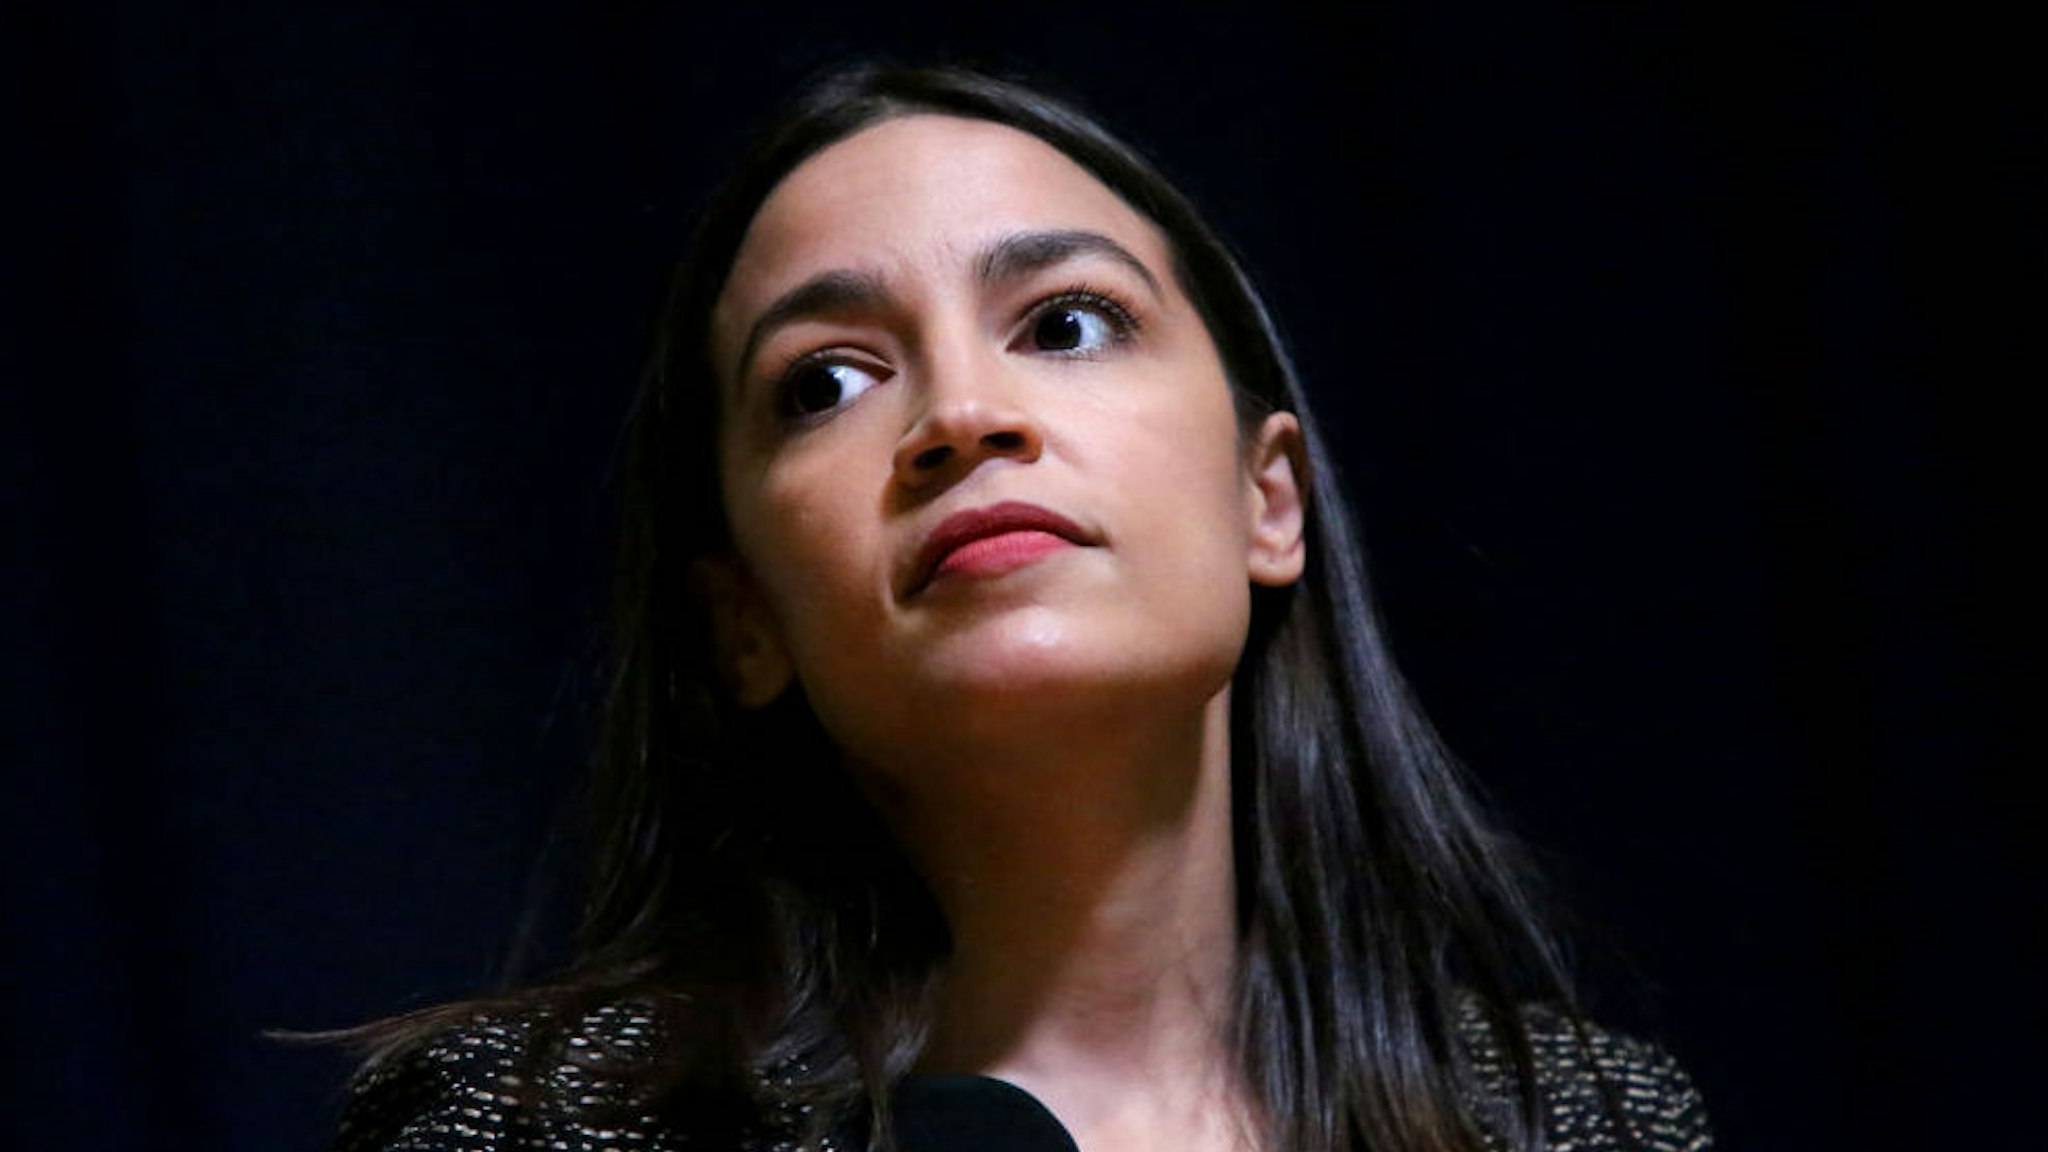 Rep. Alexandria Ocasio-Cortez (D-NY) takes questions during a Green New Deal For Public Housing Town Hall on December 14, 2019 in the Queens borough of New York City. (Photo by Yana Paskova/Getty Images)